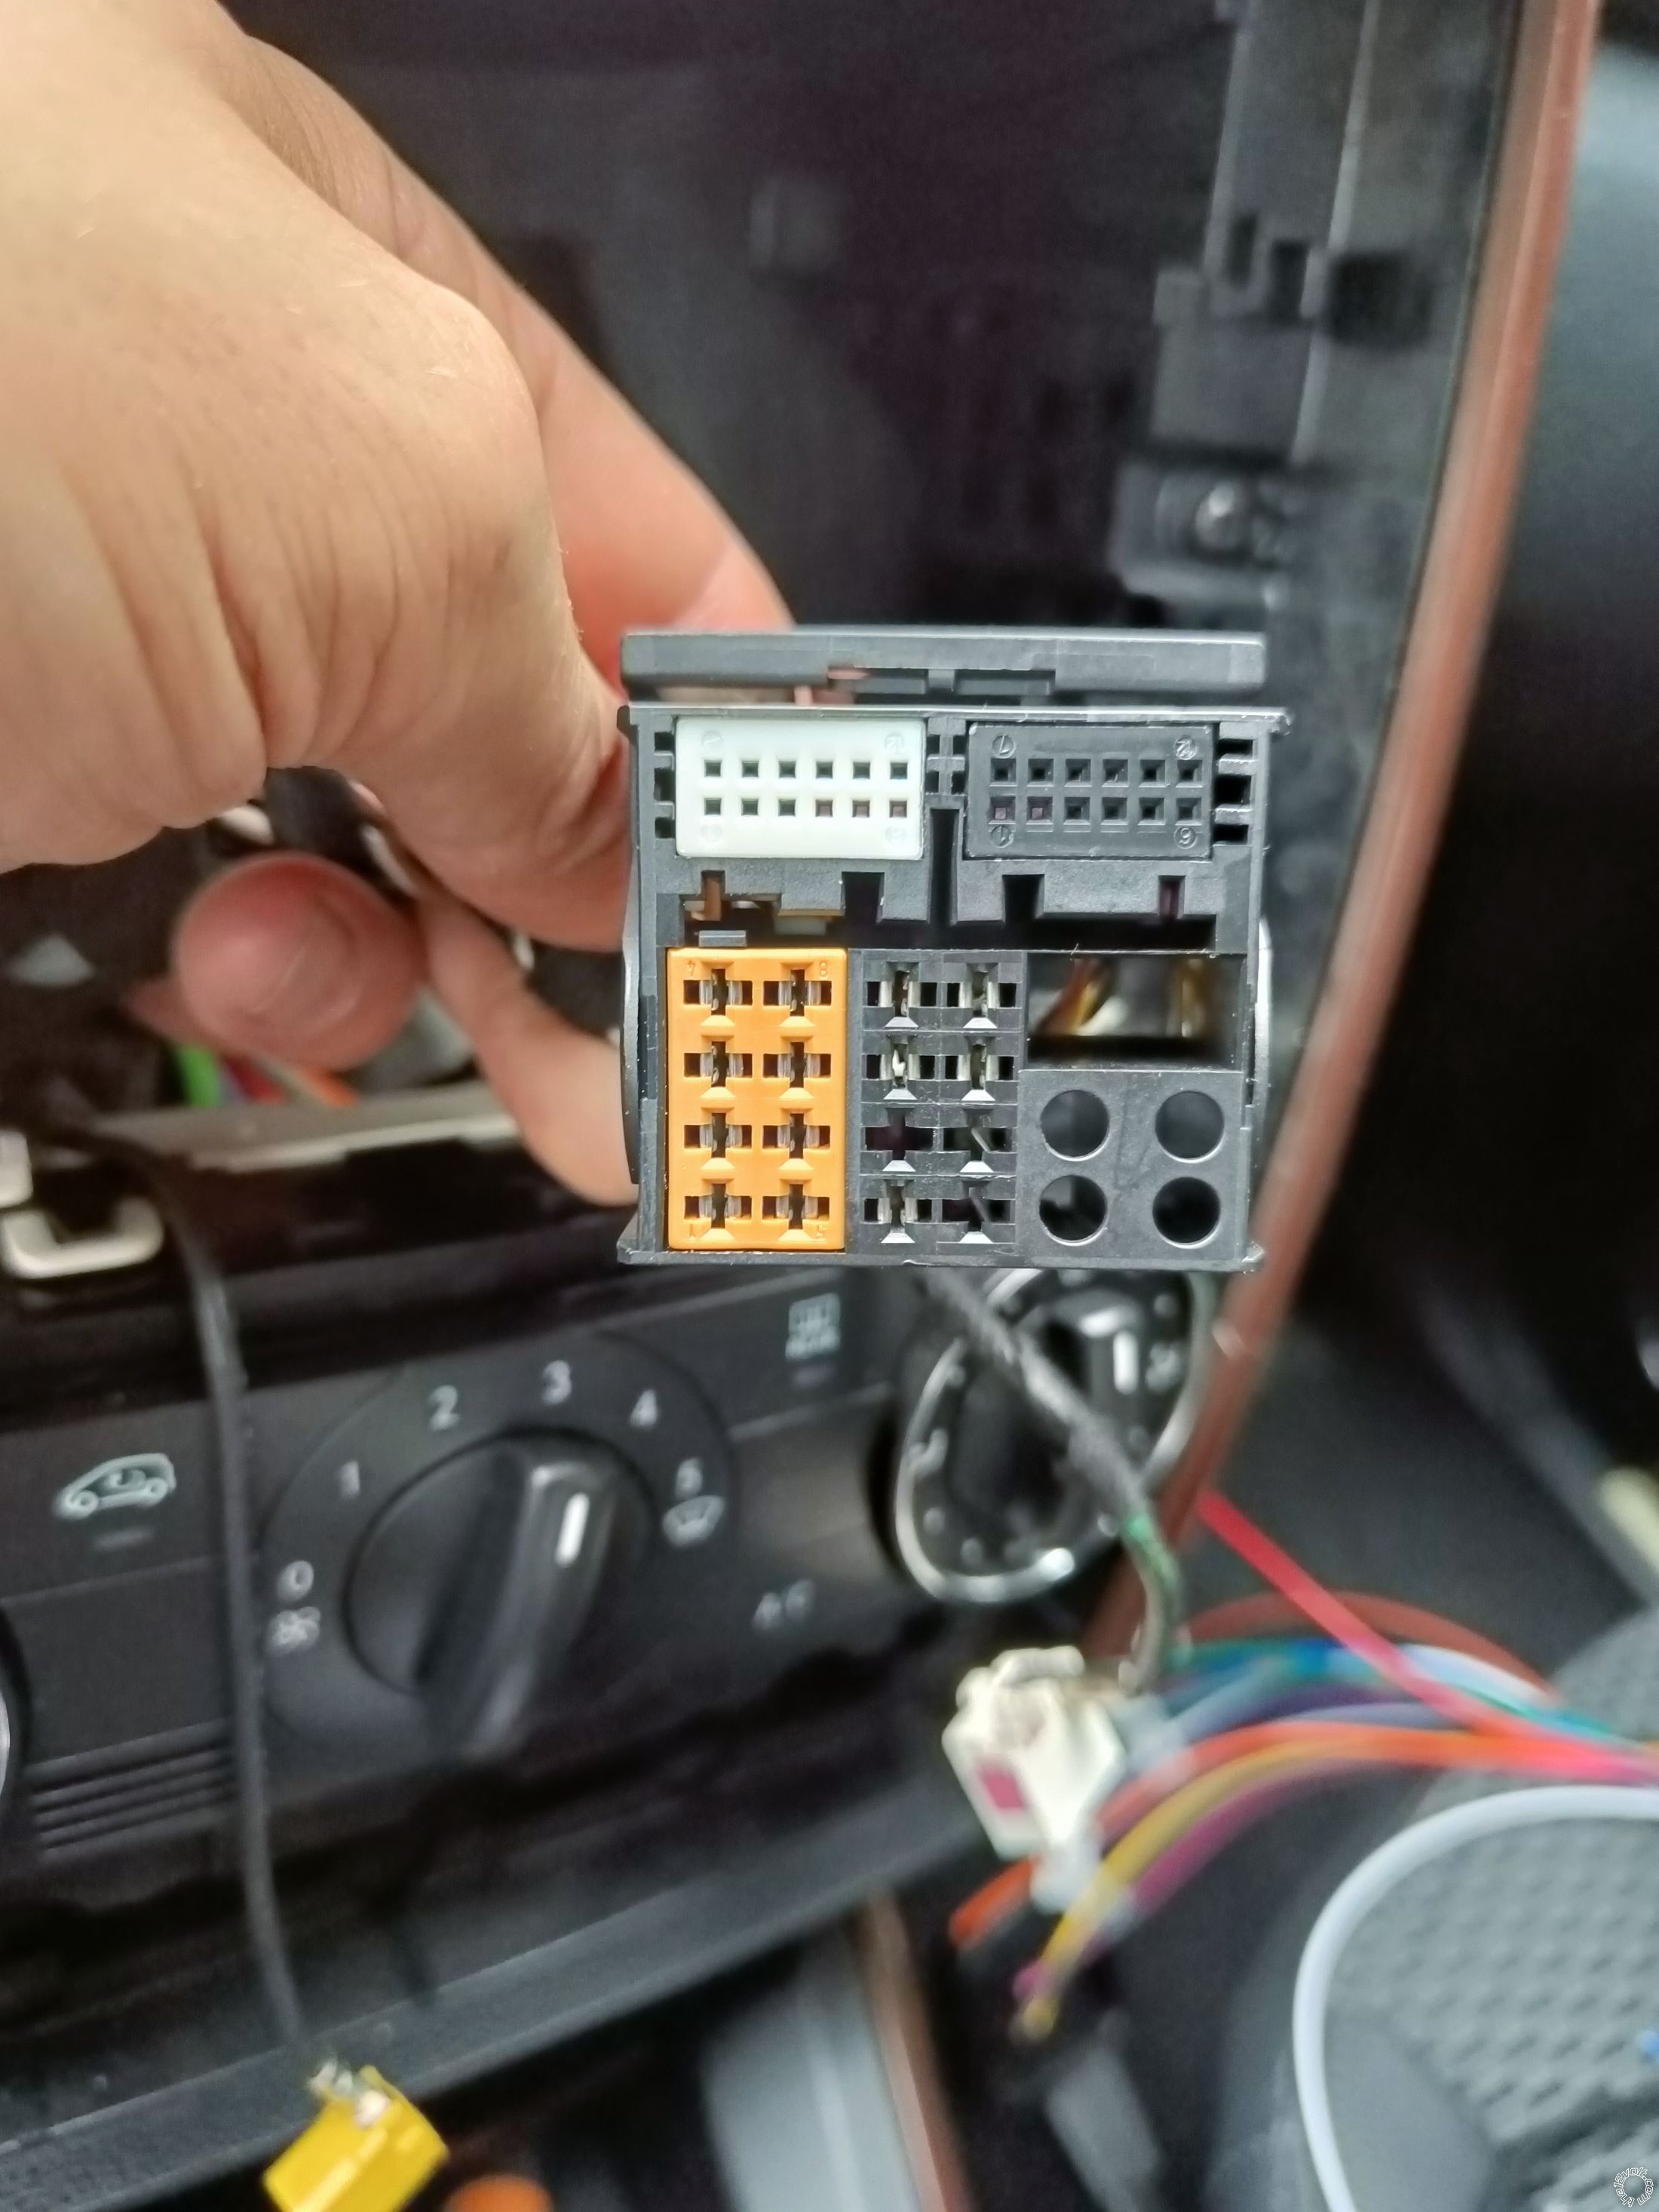 2010 Mercedes Benz A Class, MF2830 Stock Unit Wiring? -- posted image.